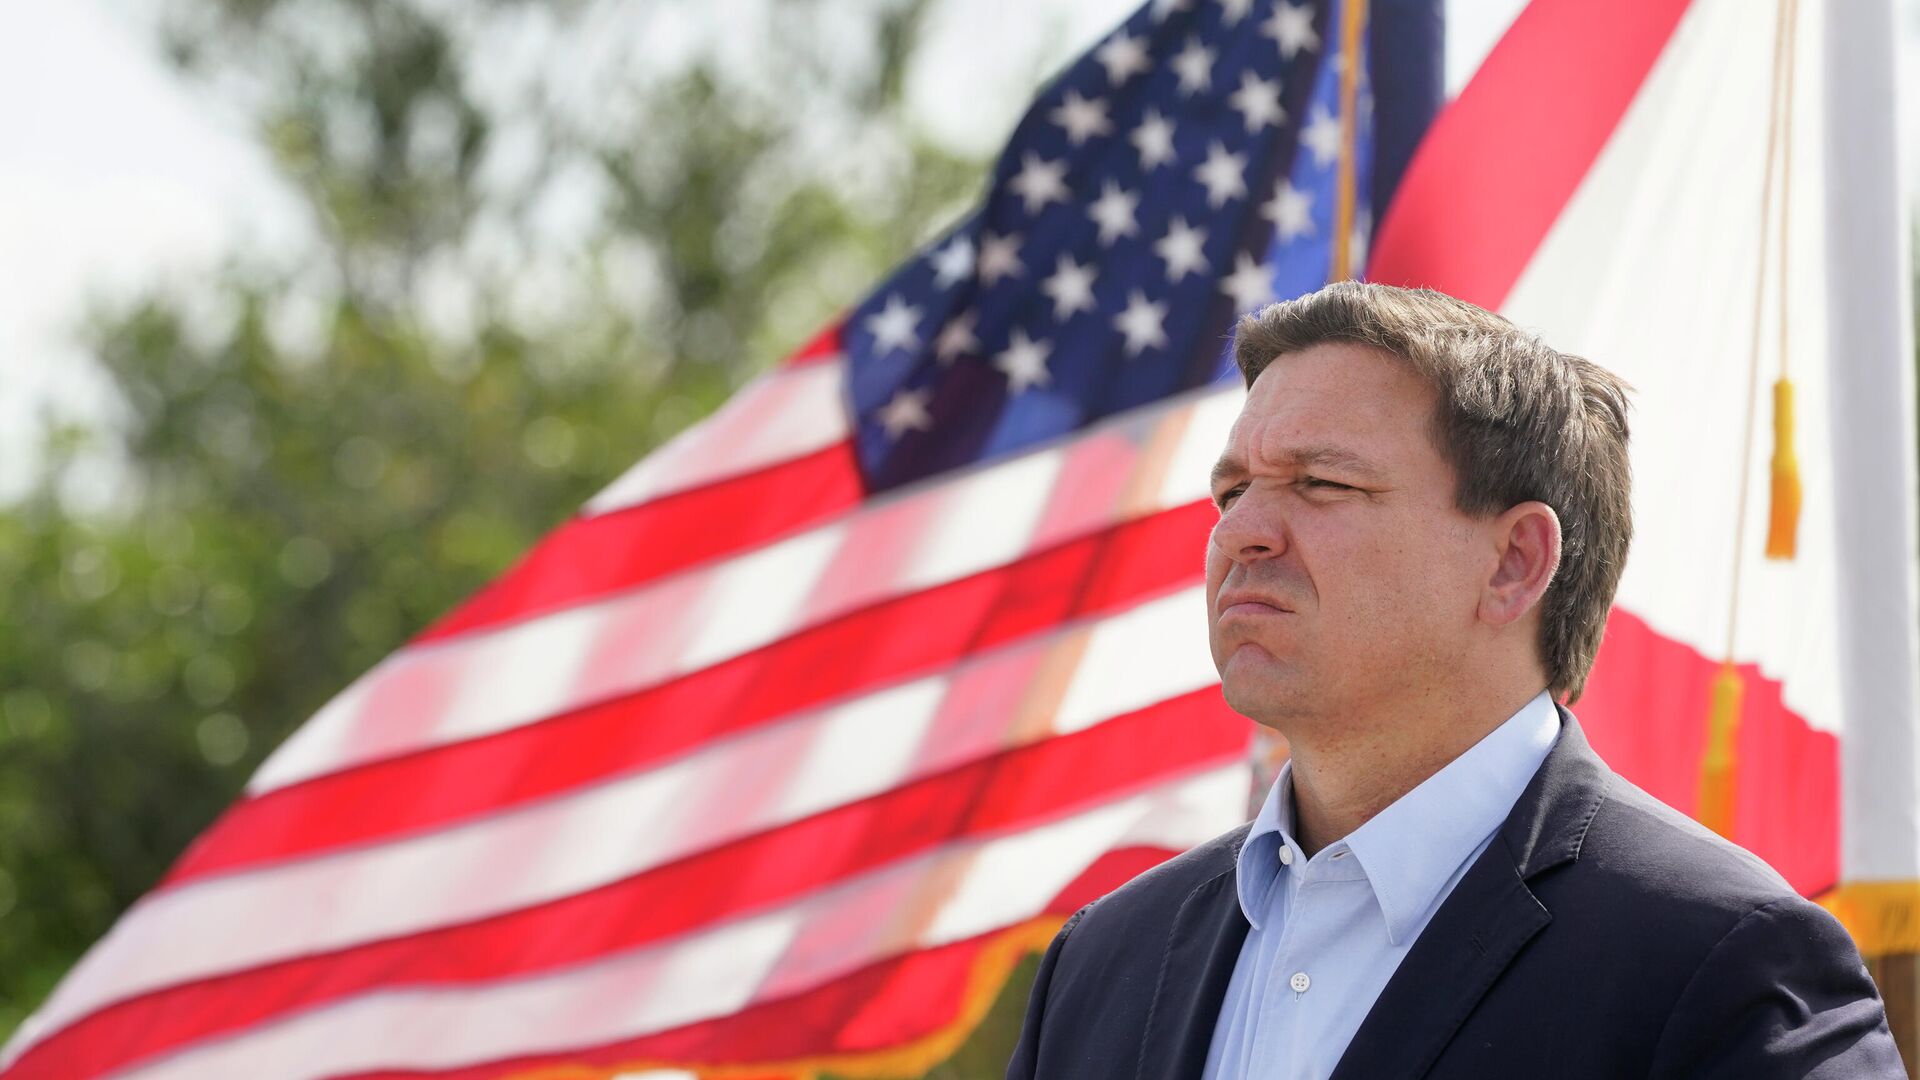 Florida Gov. Ron DeSantis listens during a news conference, Tuesday, Aug. 3, 2021, near the Shark Valley Visitor Center in Miami - Sputnik International, 1920, 09.11.2021